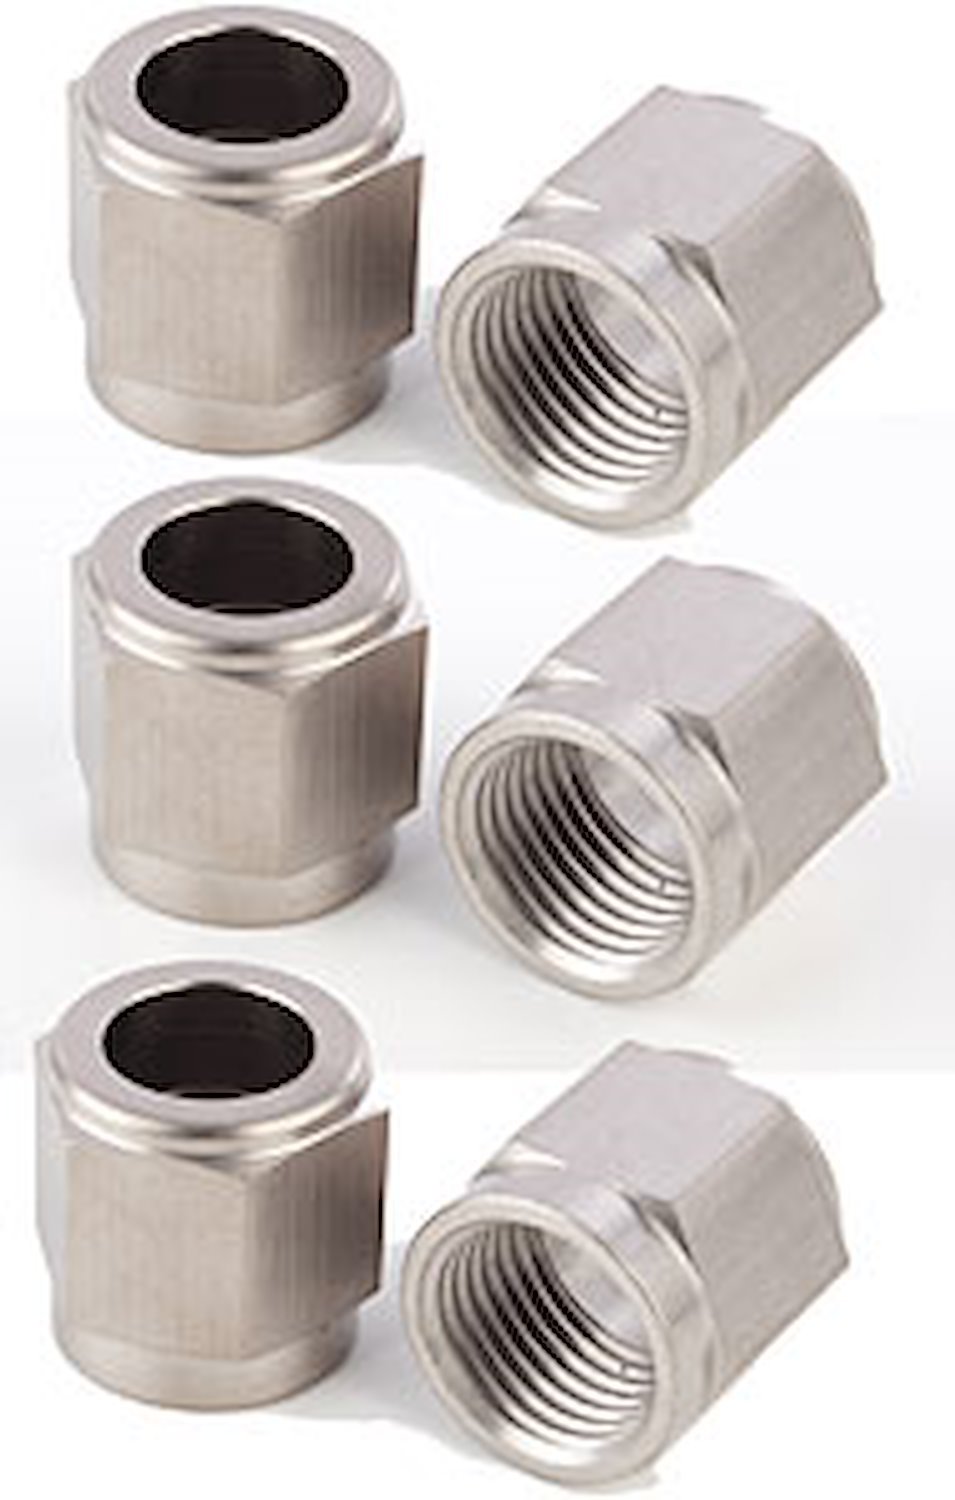 Tube Nuts, Electroless Nickel Plated Aluminum [-4 AN]